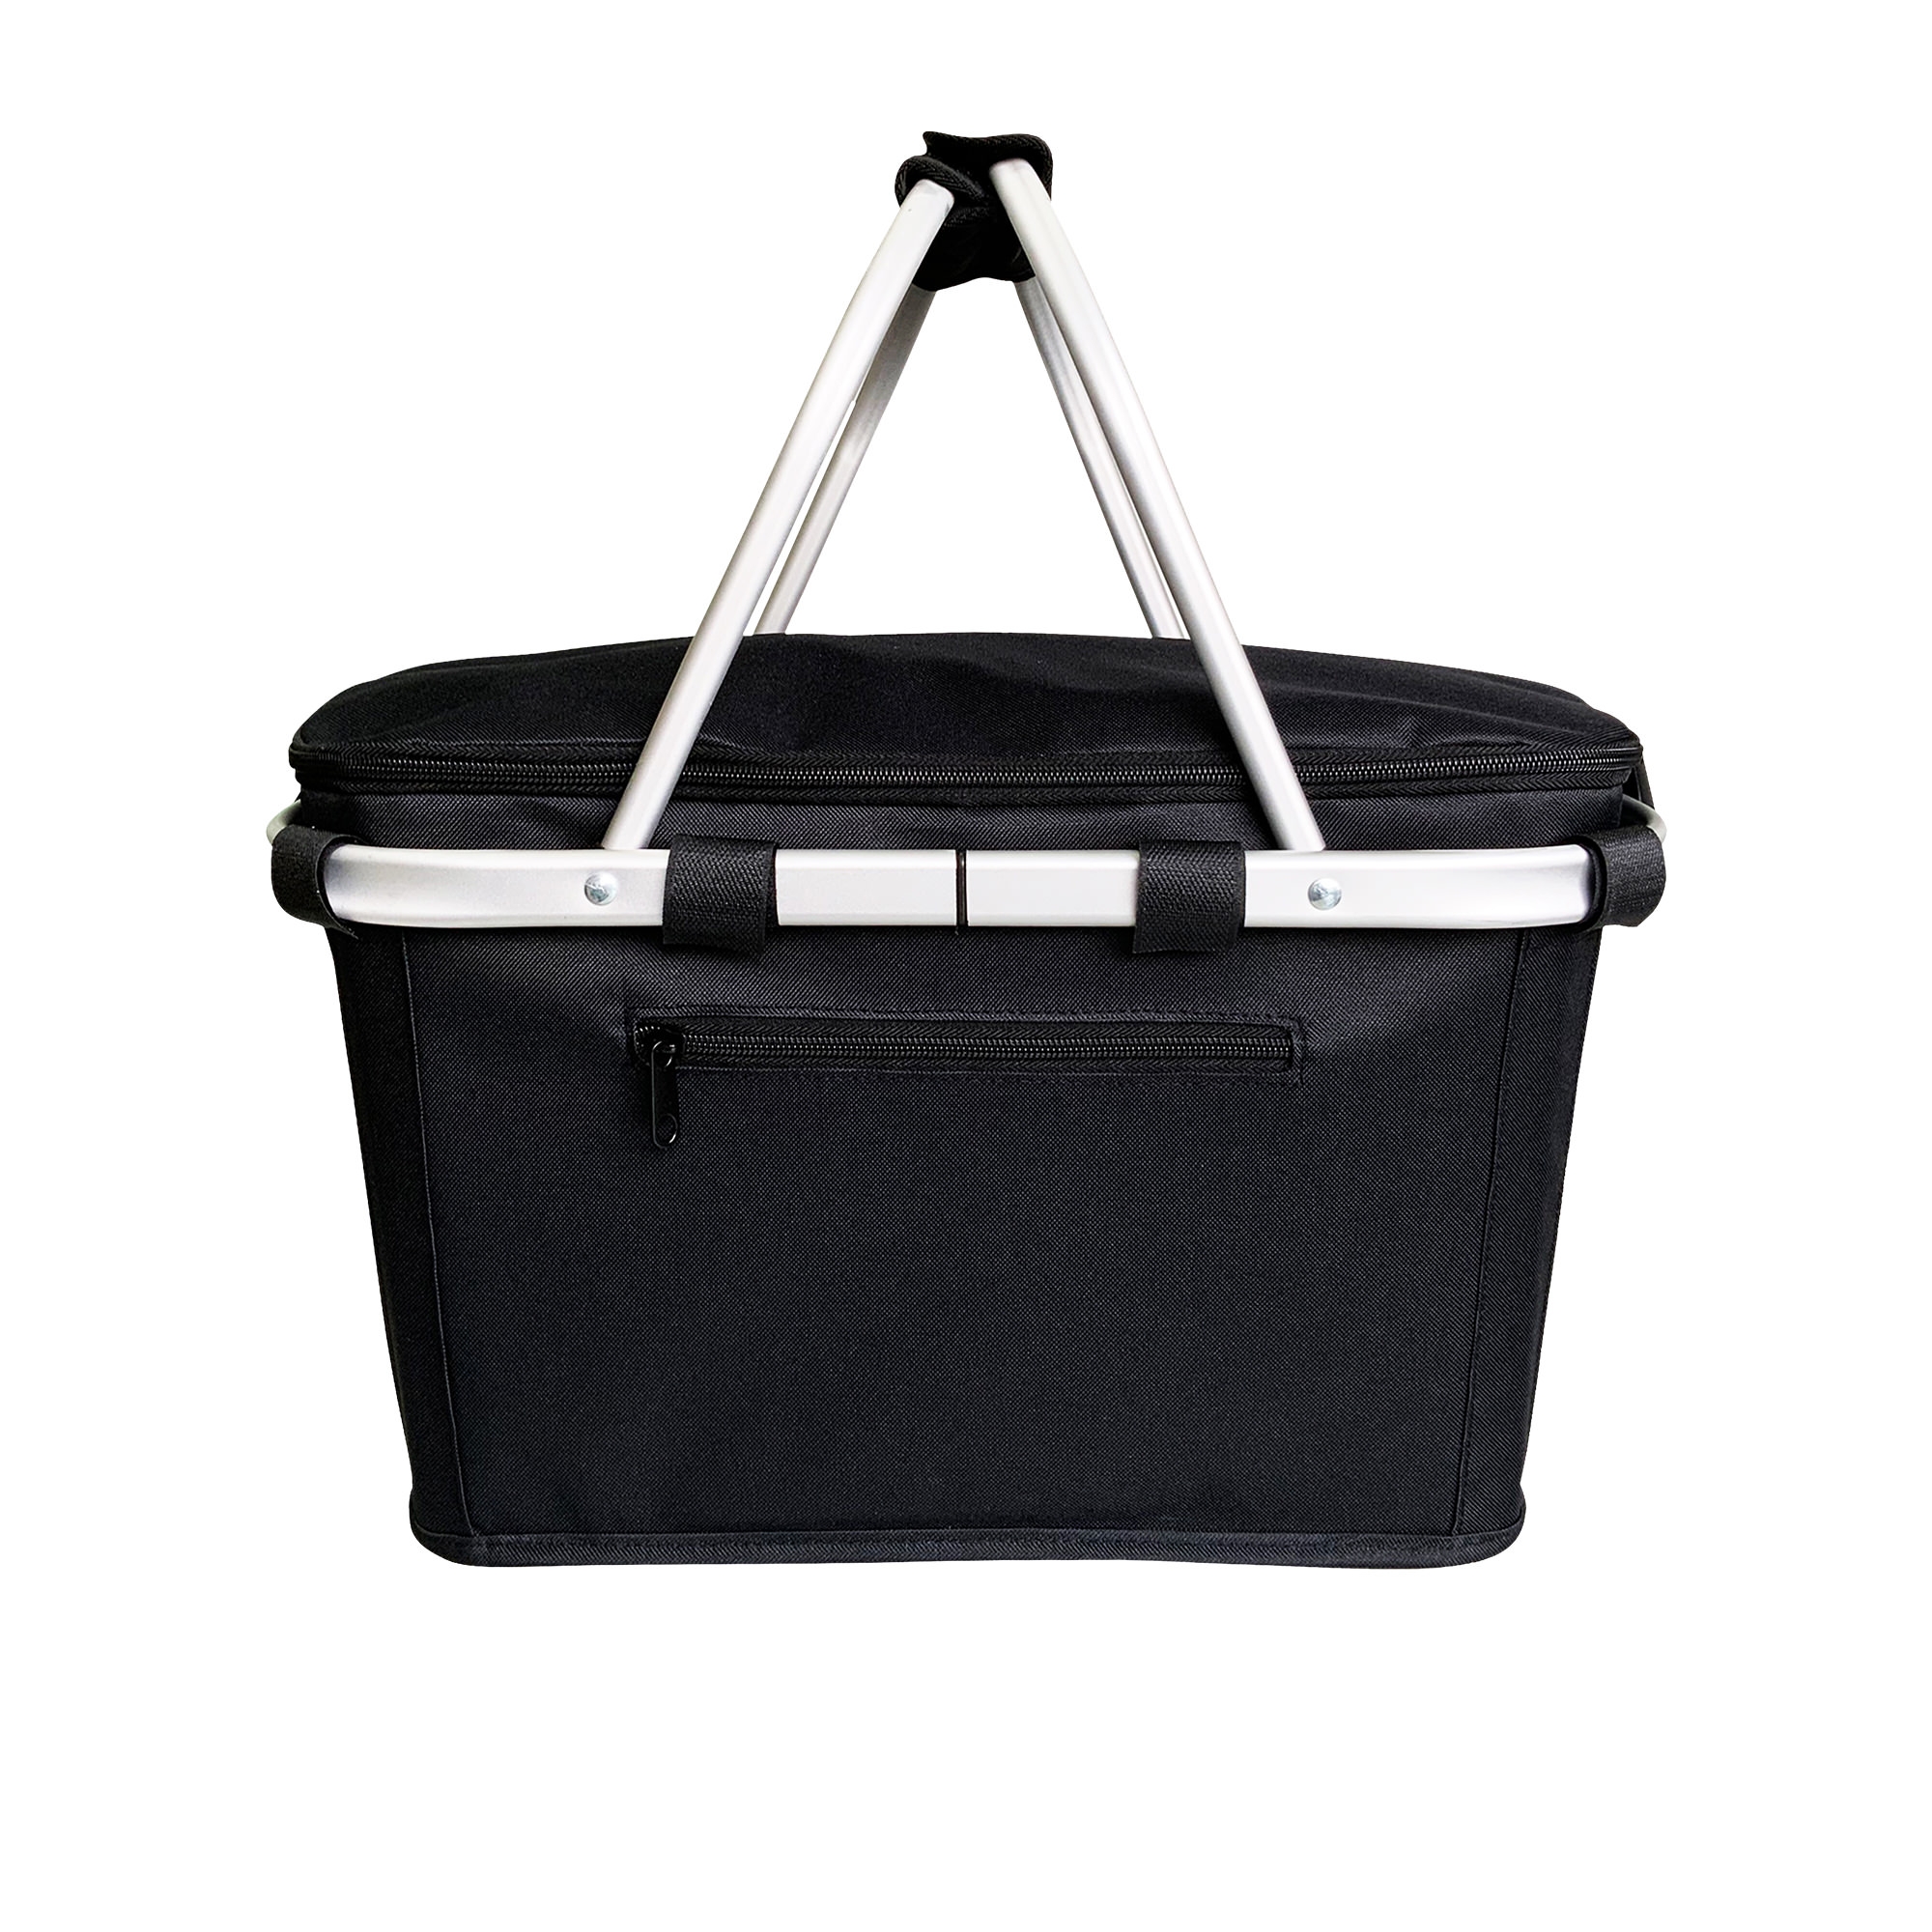 Sachi Insulated Carry Basket with Lid Black Image 2